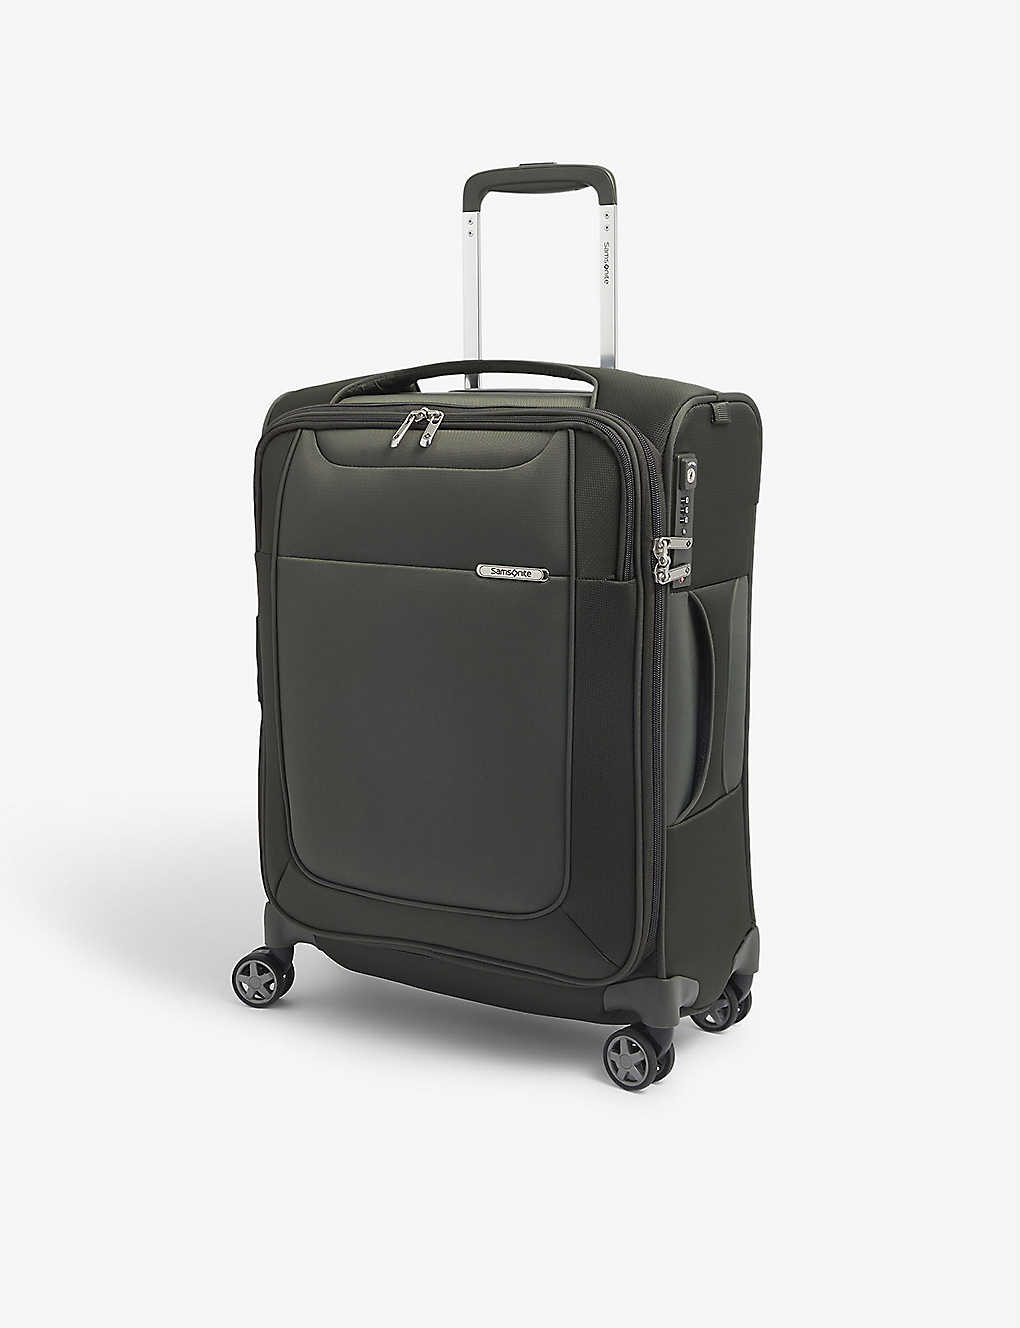 Samsonite Spinner Branded Woven Suitcase In Climbing Ivy